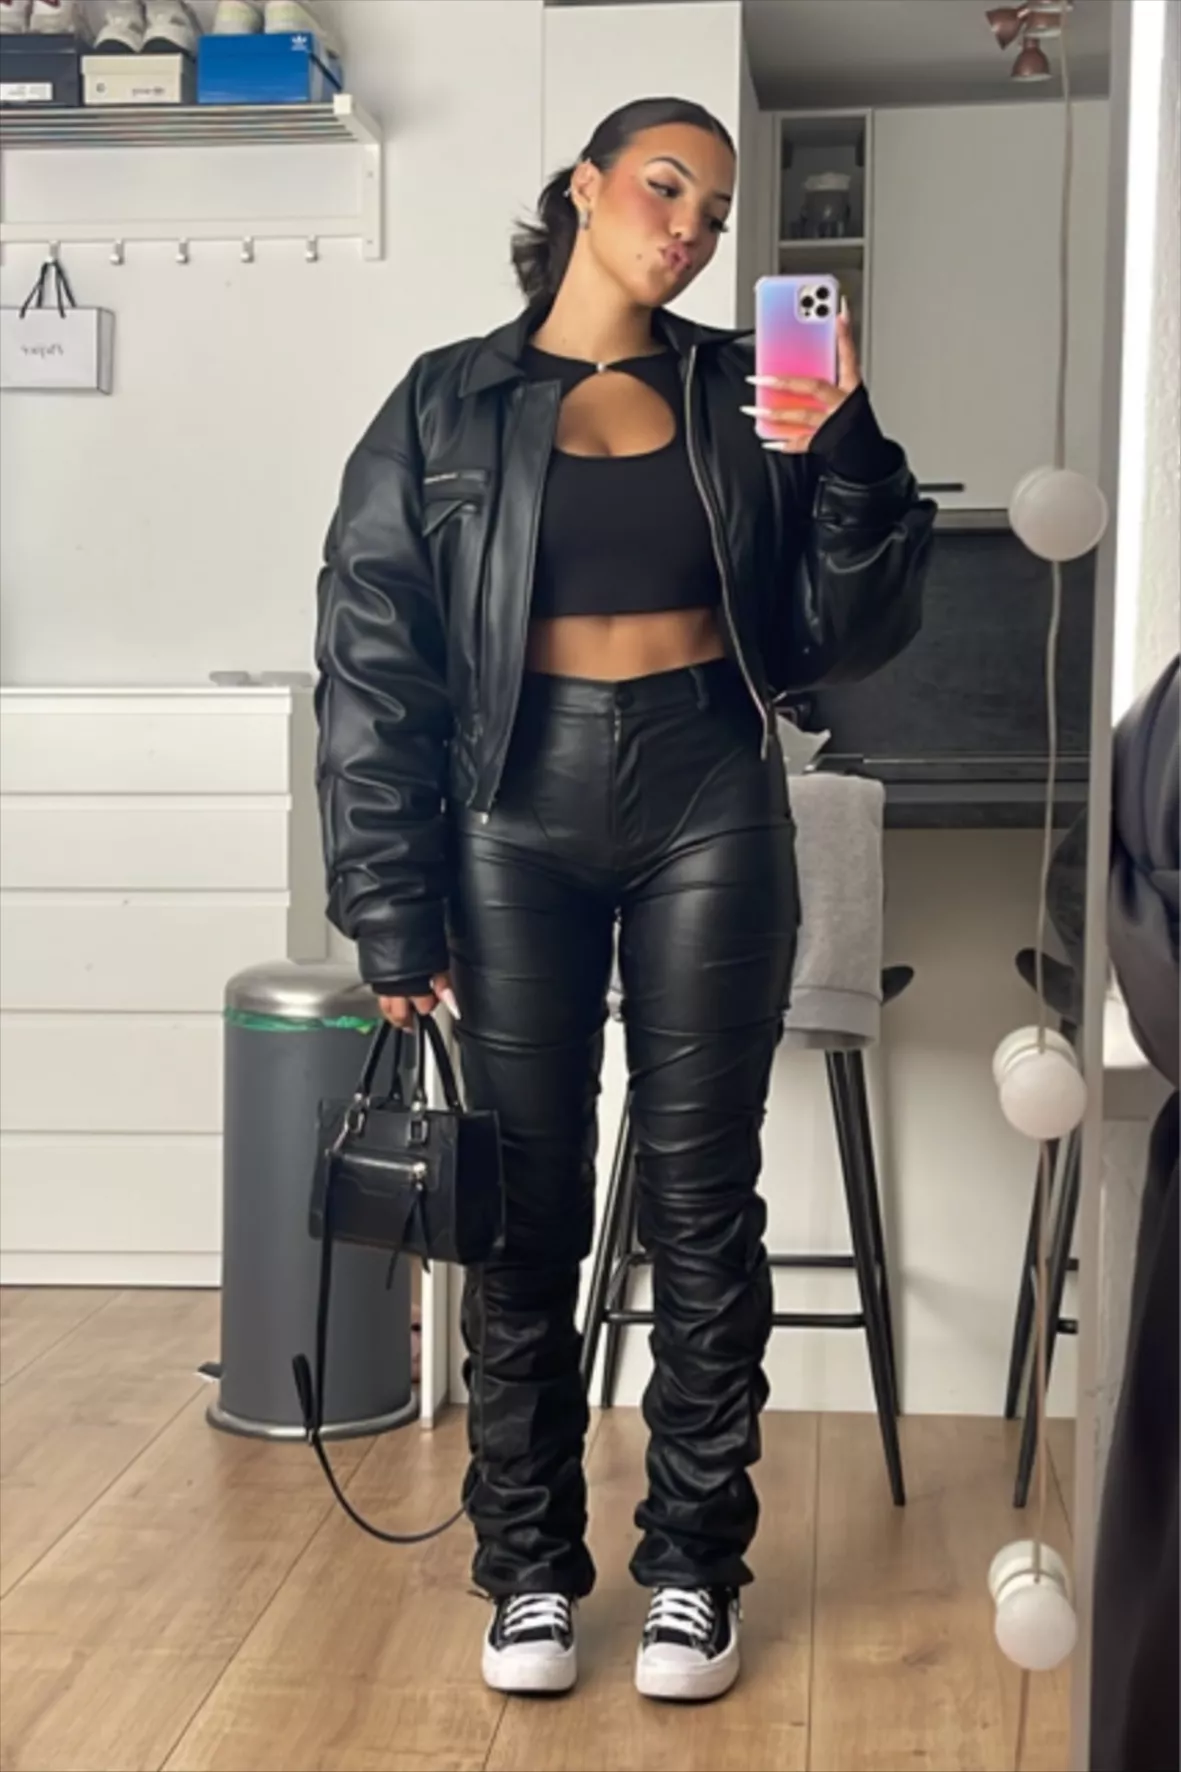 Black Leather Leggings with Jewelry Outfits (61 ideas & outfits)